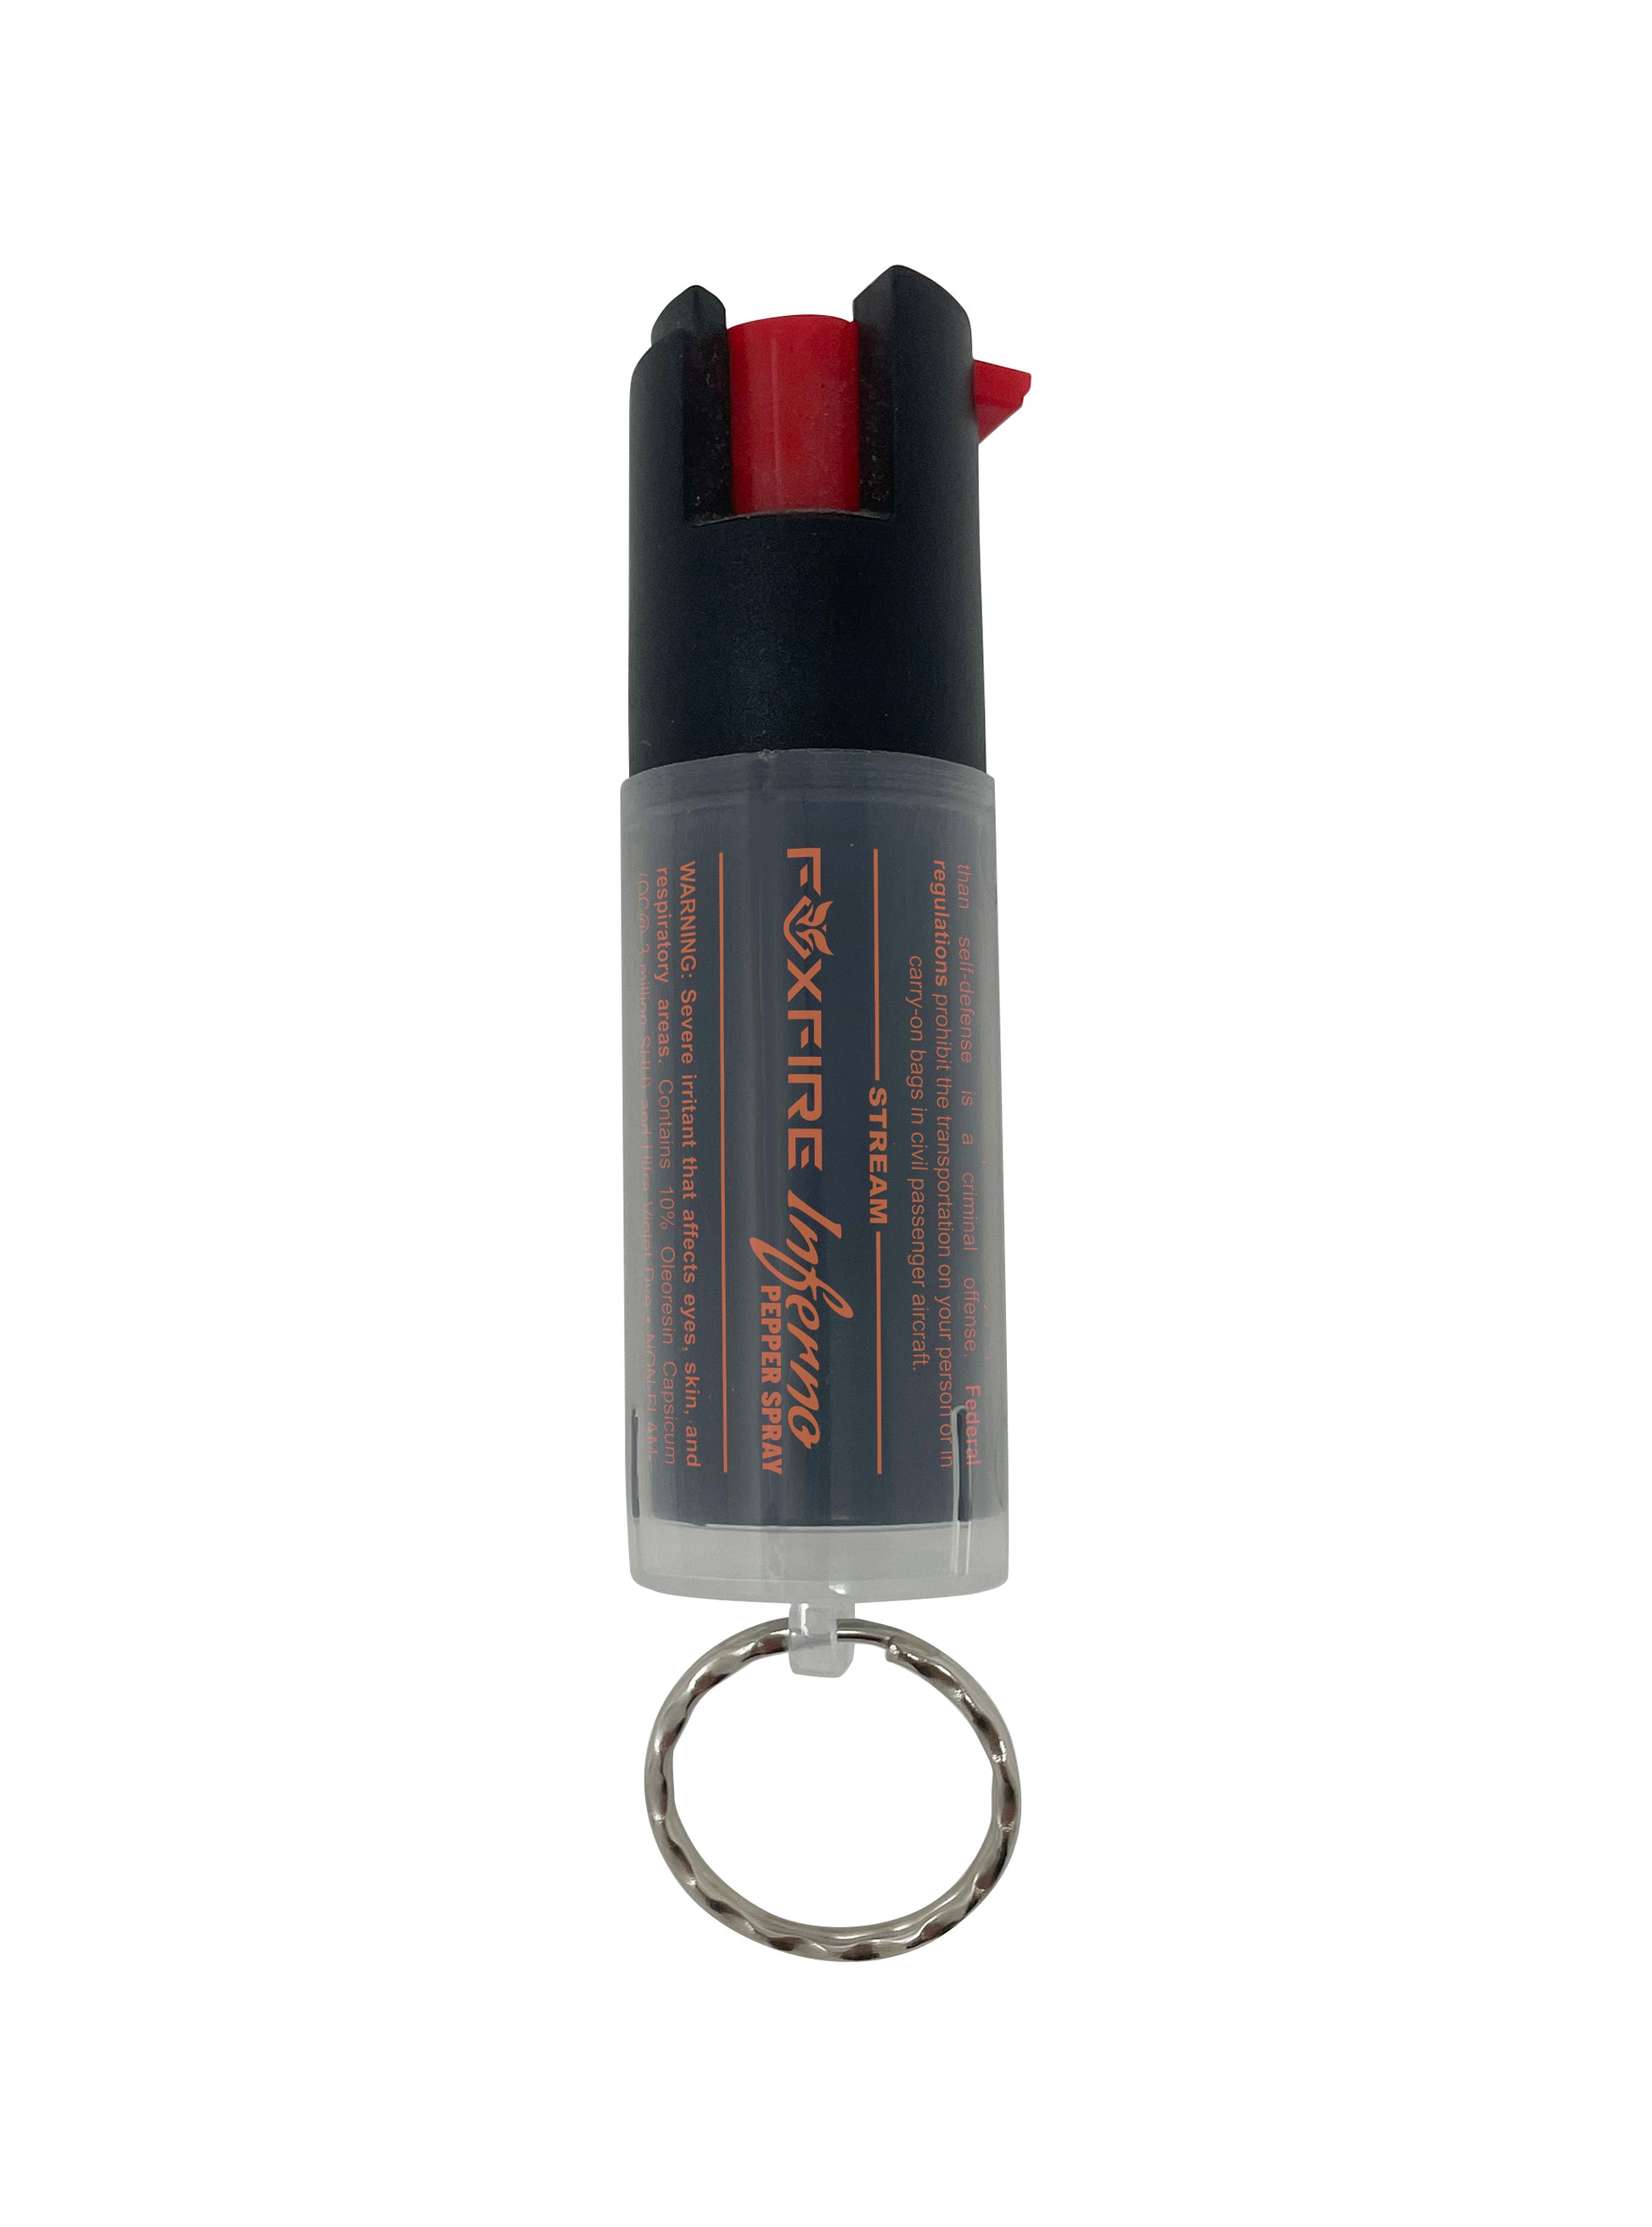 FoxFire® Inferno Pepper Spray (1/2 Ounce Twin Pack) with Key Ring